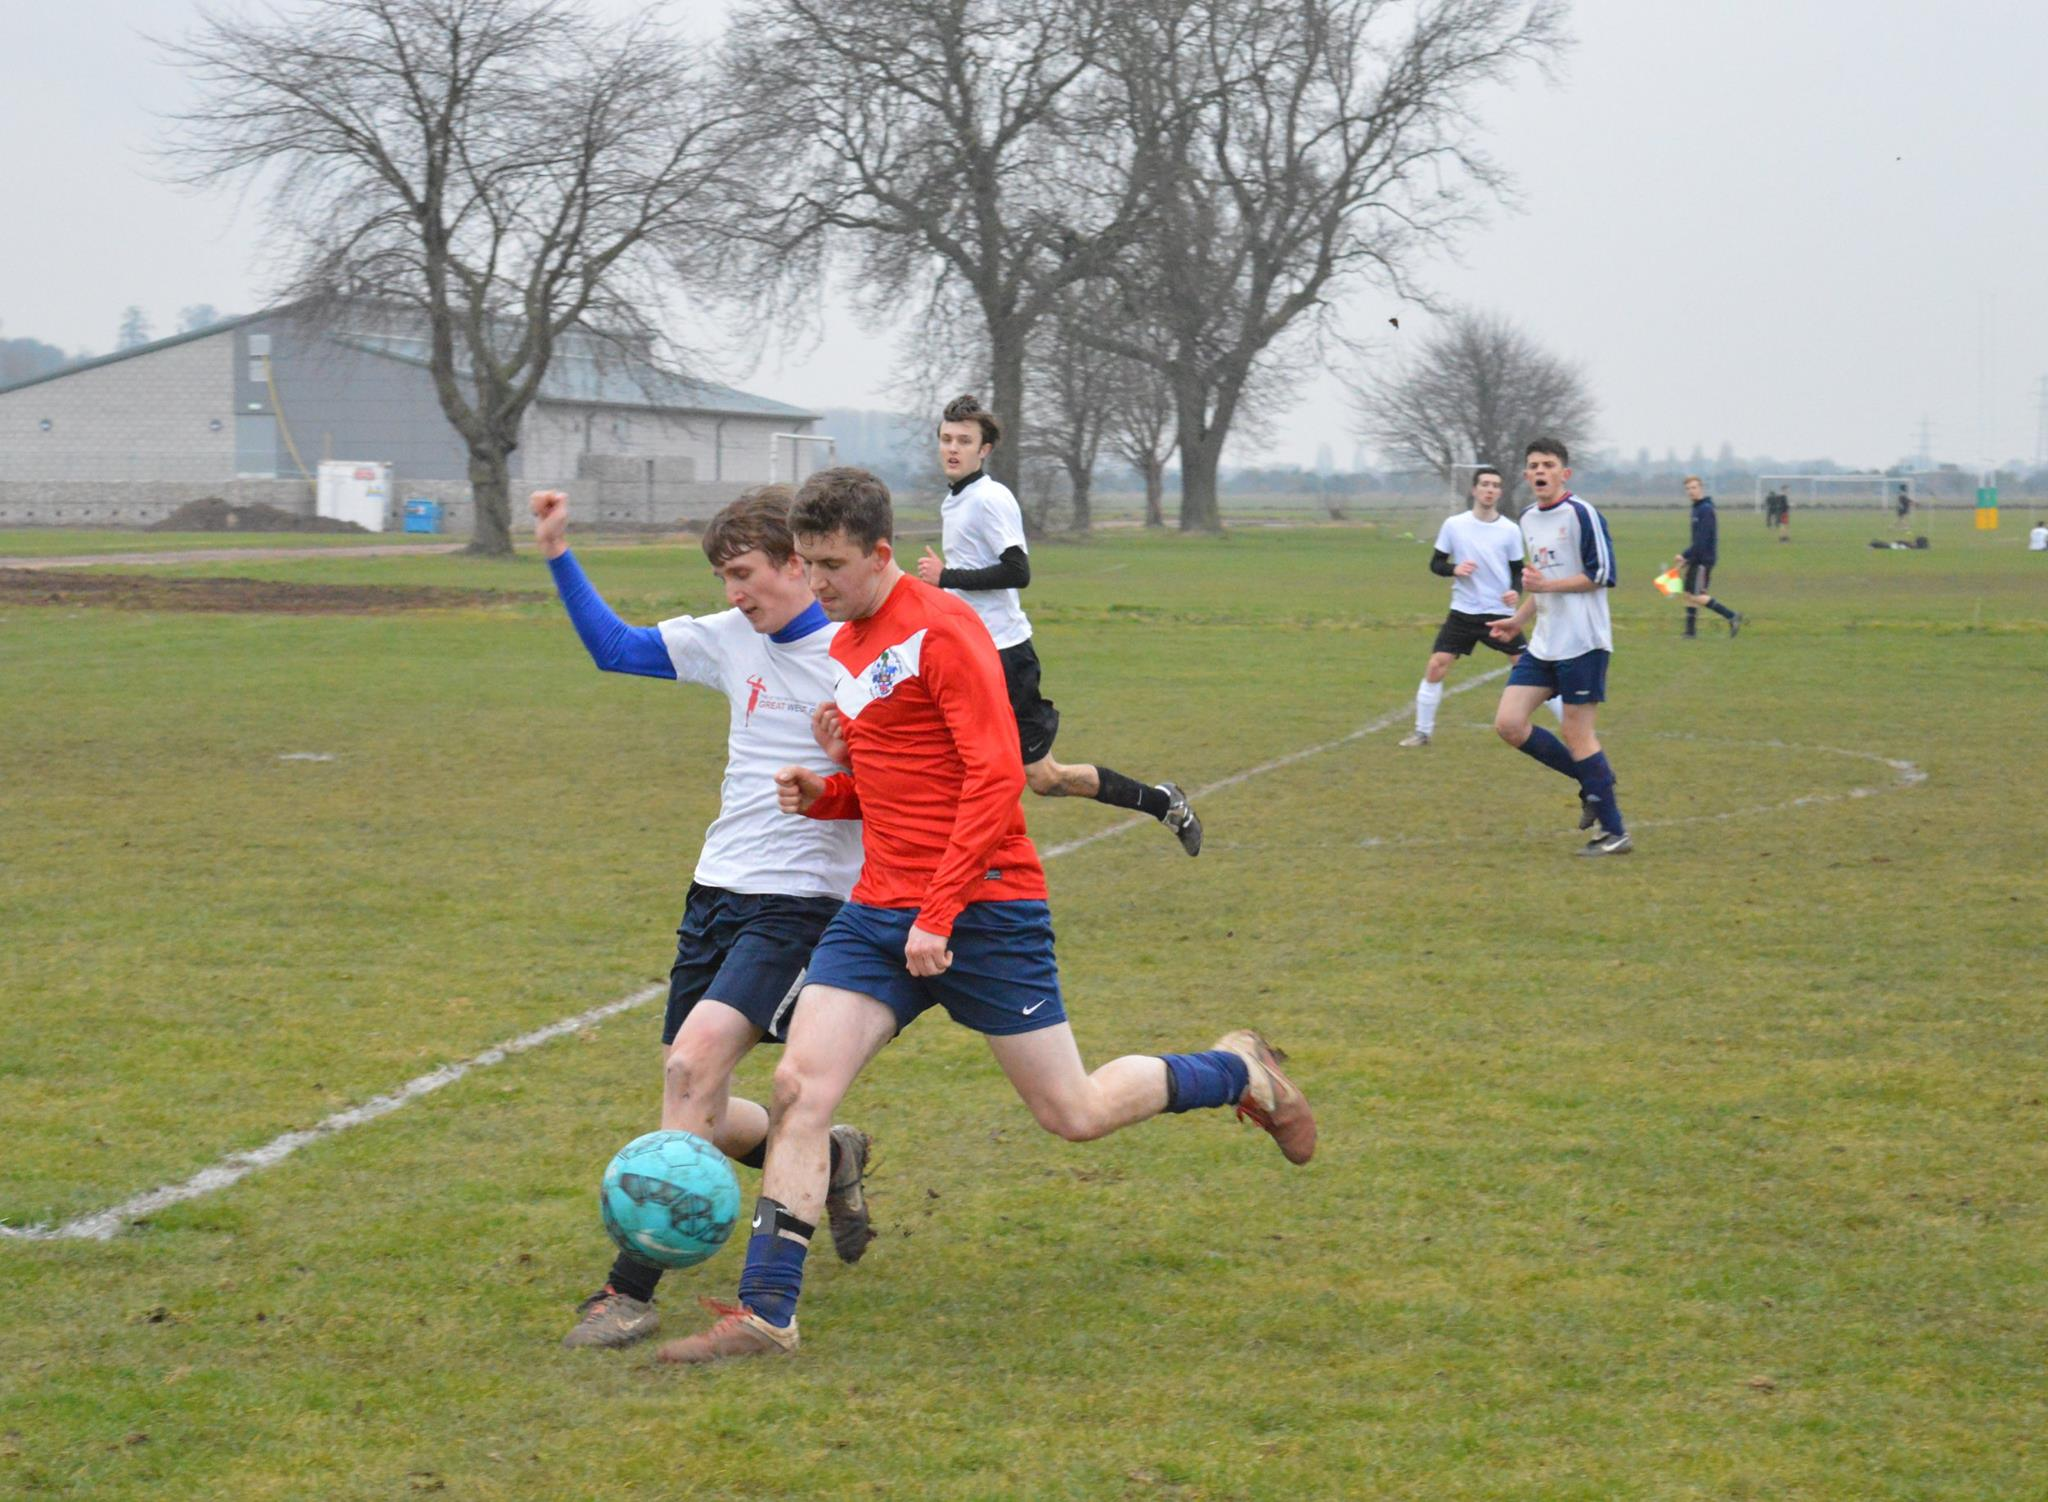 Rory playing for the Cricket Club's Football Team